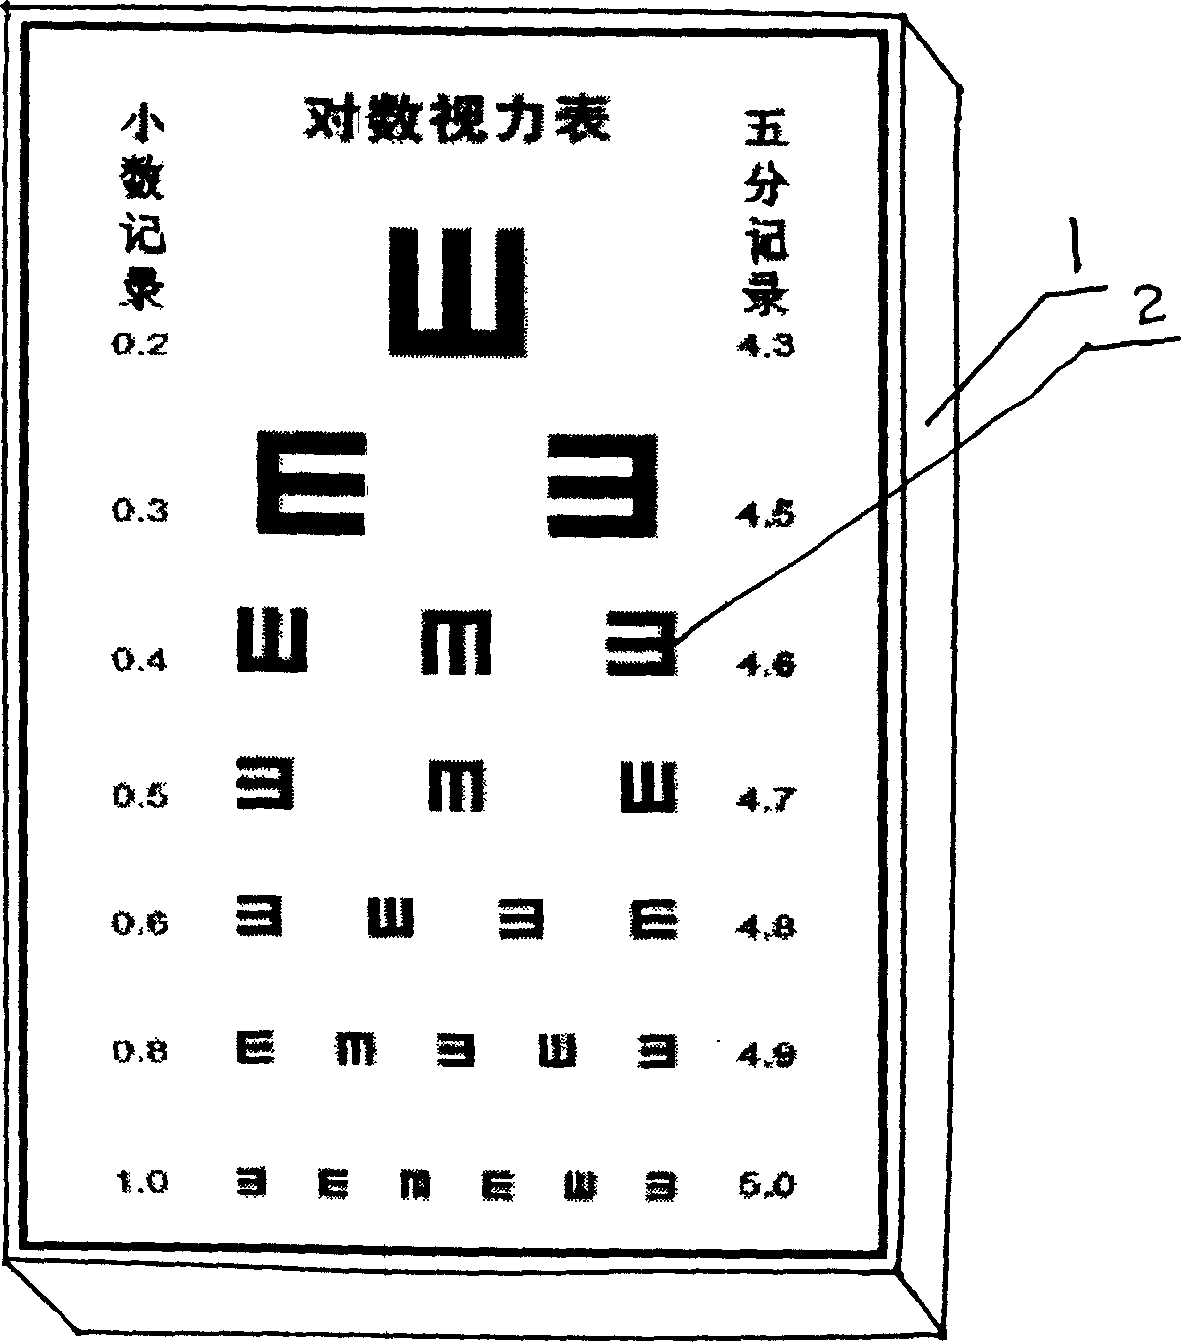 Remotely-controlled self-testing eye chart